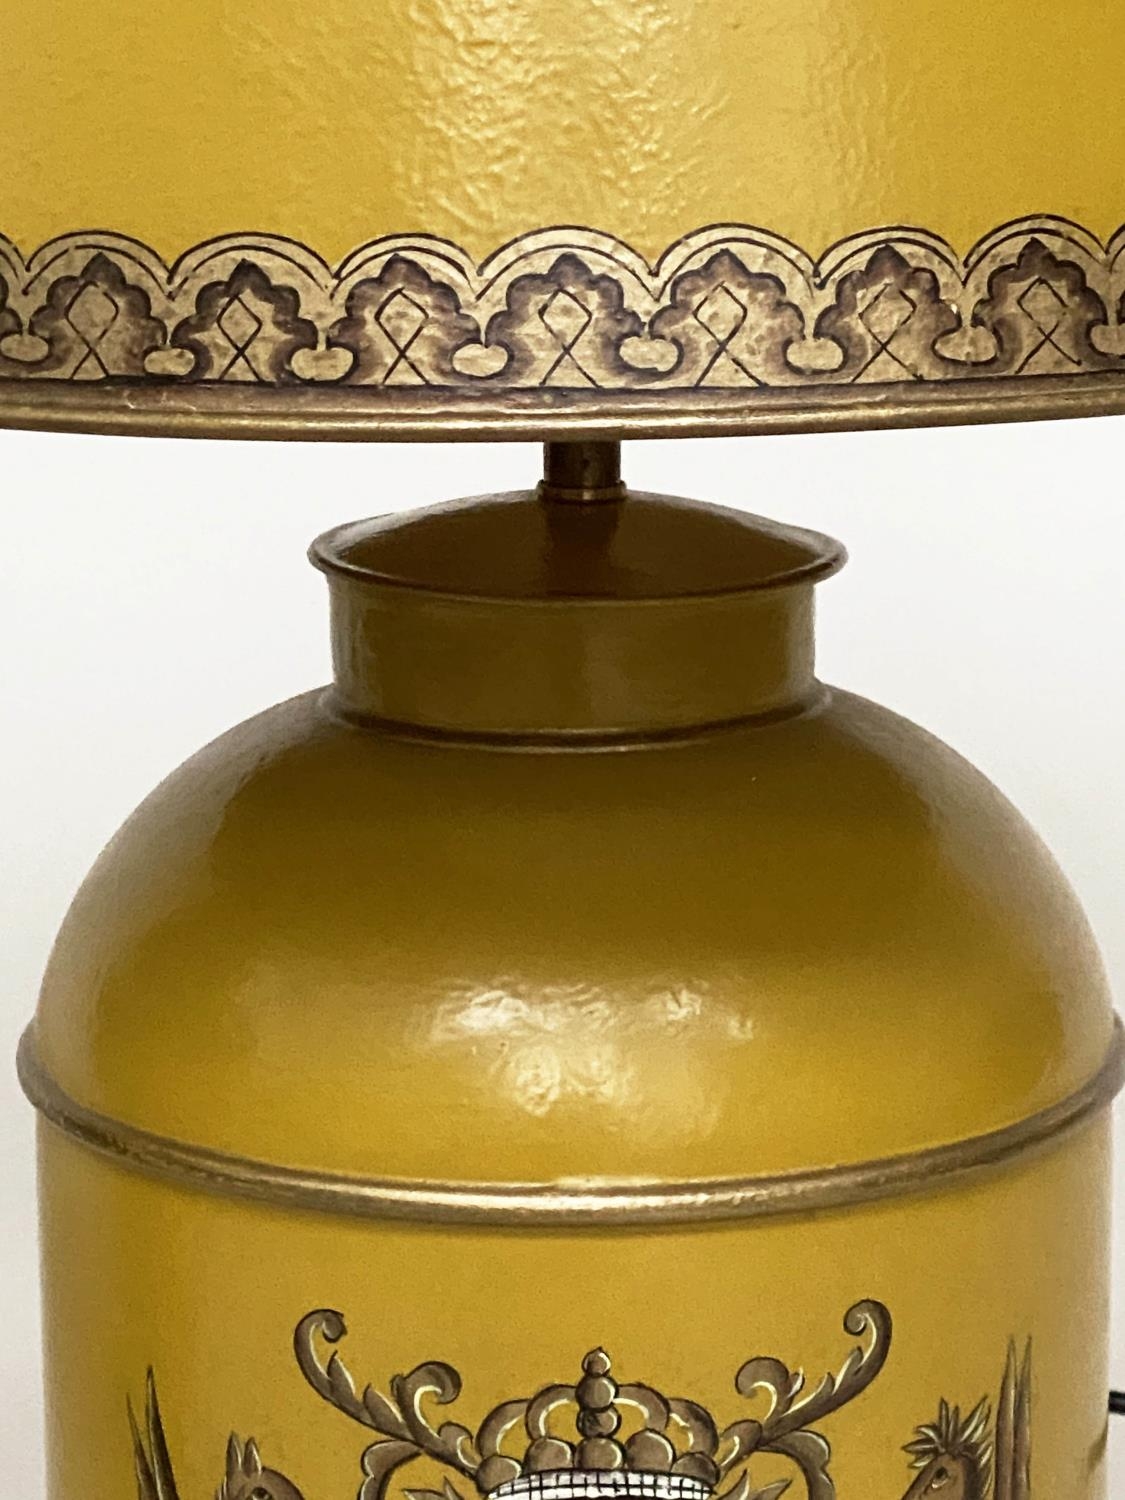 CANNISTER LAMPS, a pair, yellow in the form of lidded tea canisters bearing Royal Coat of Arms - Image 8 of 9